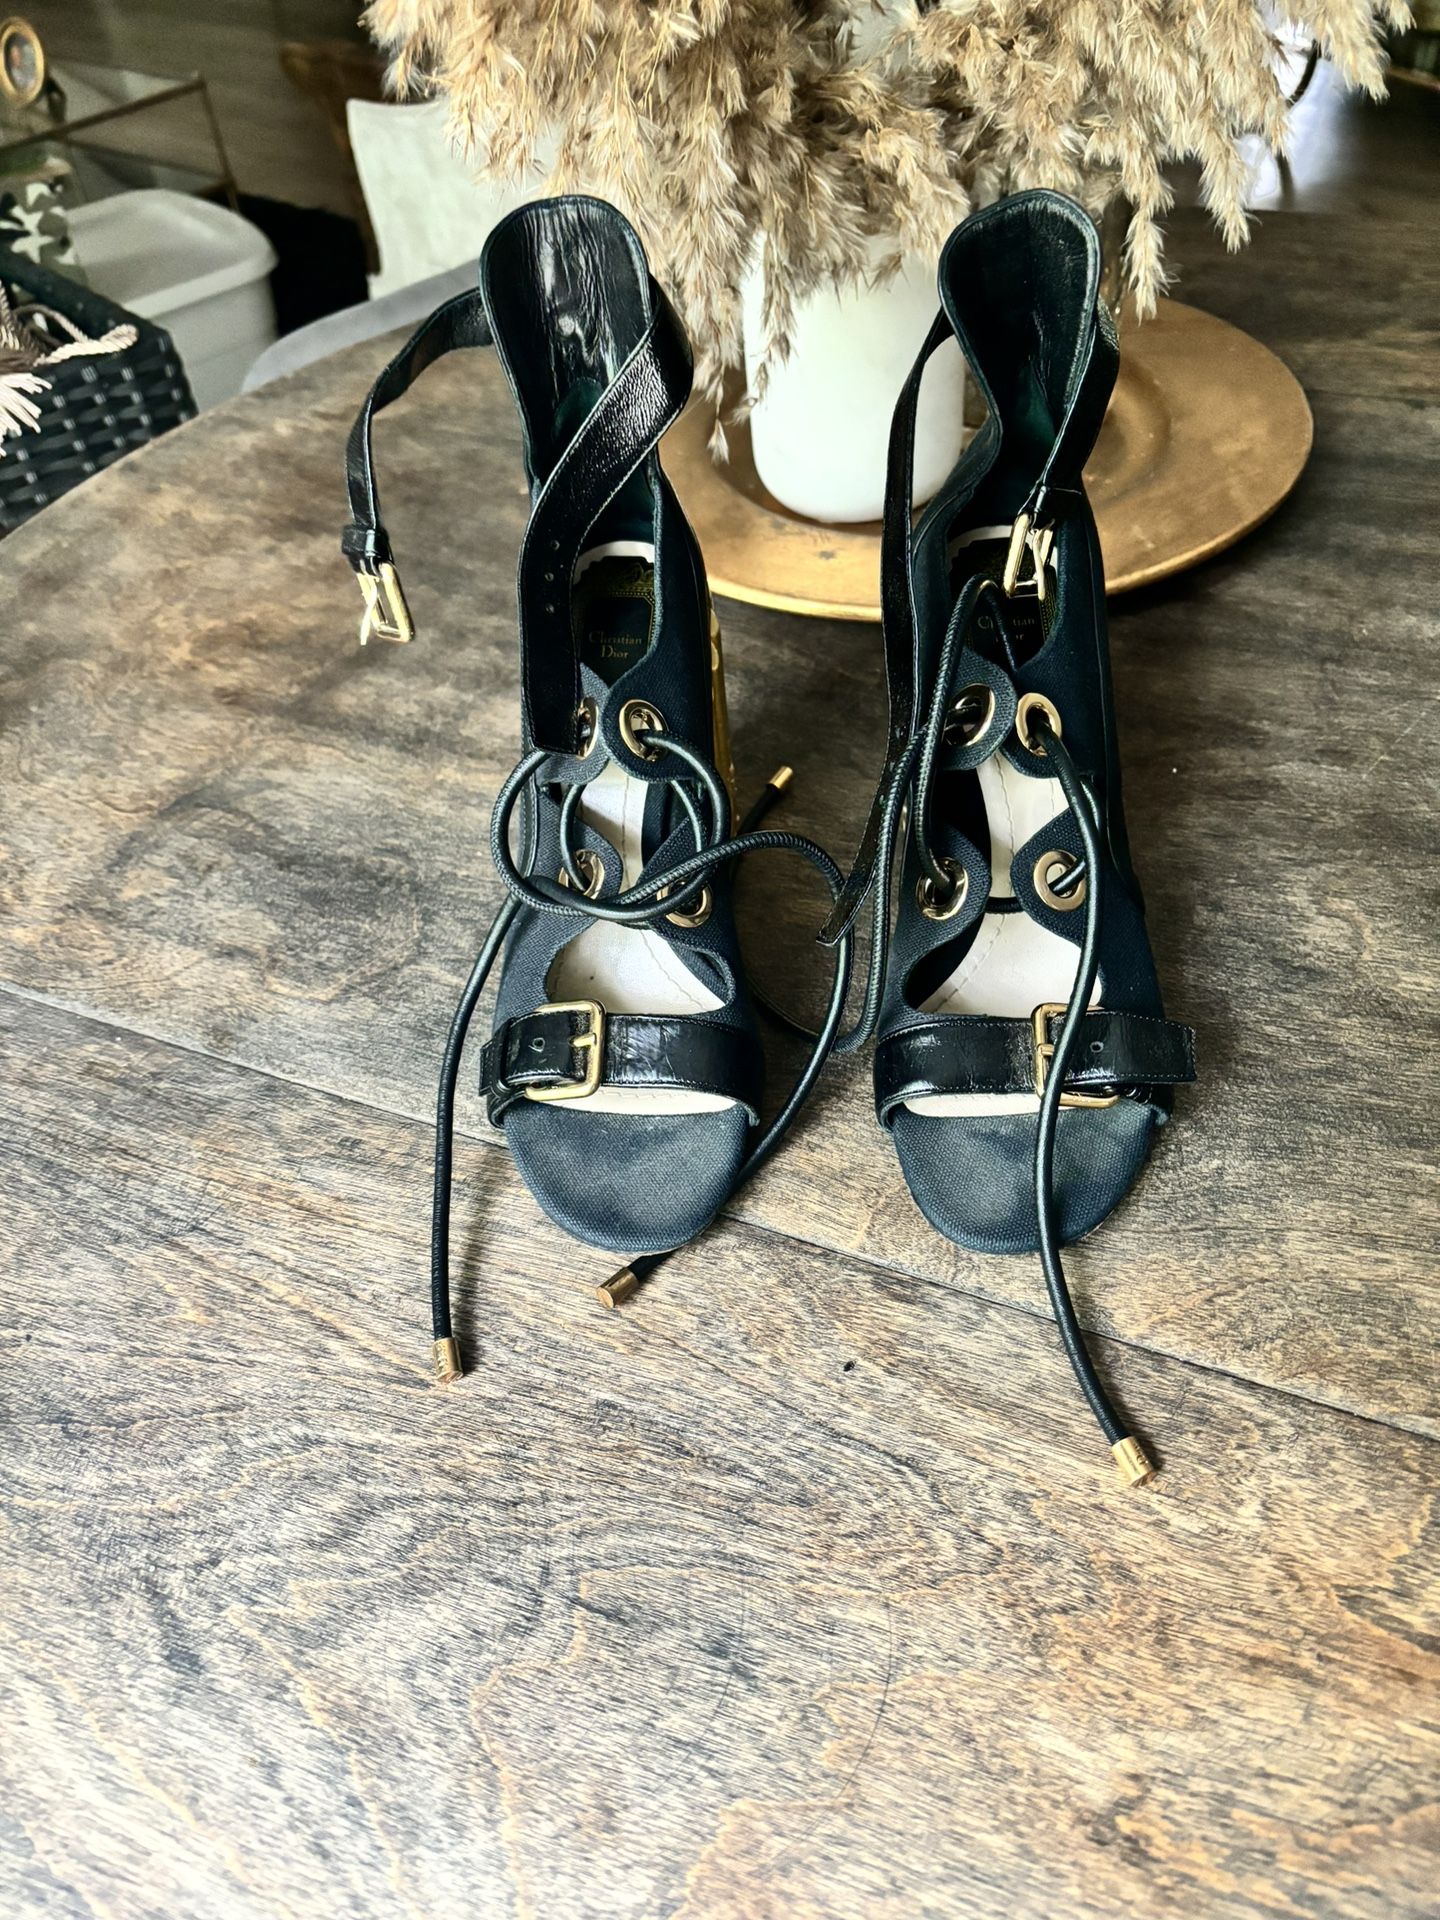 Authentic Christian Dior Strapy Heels Size 38 $125